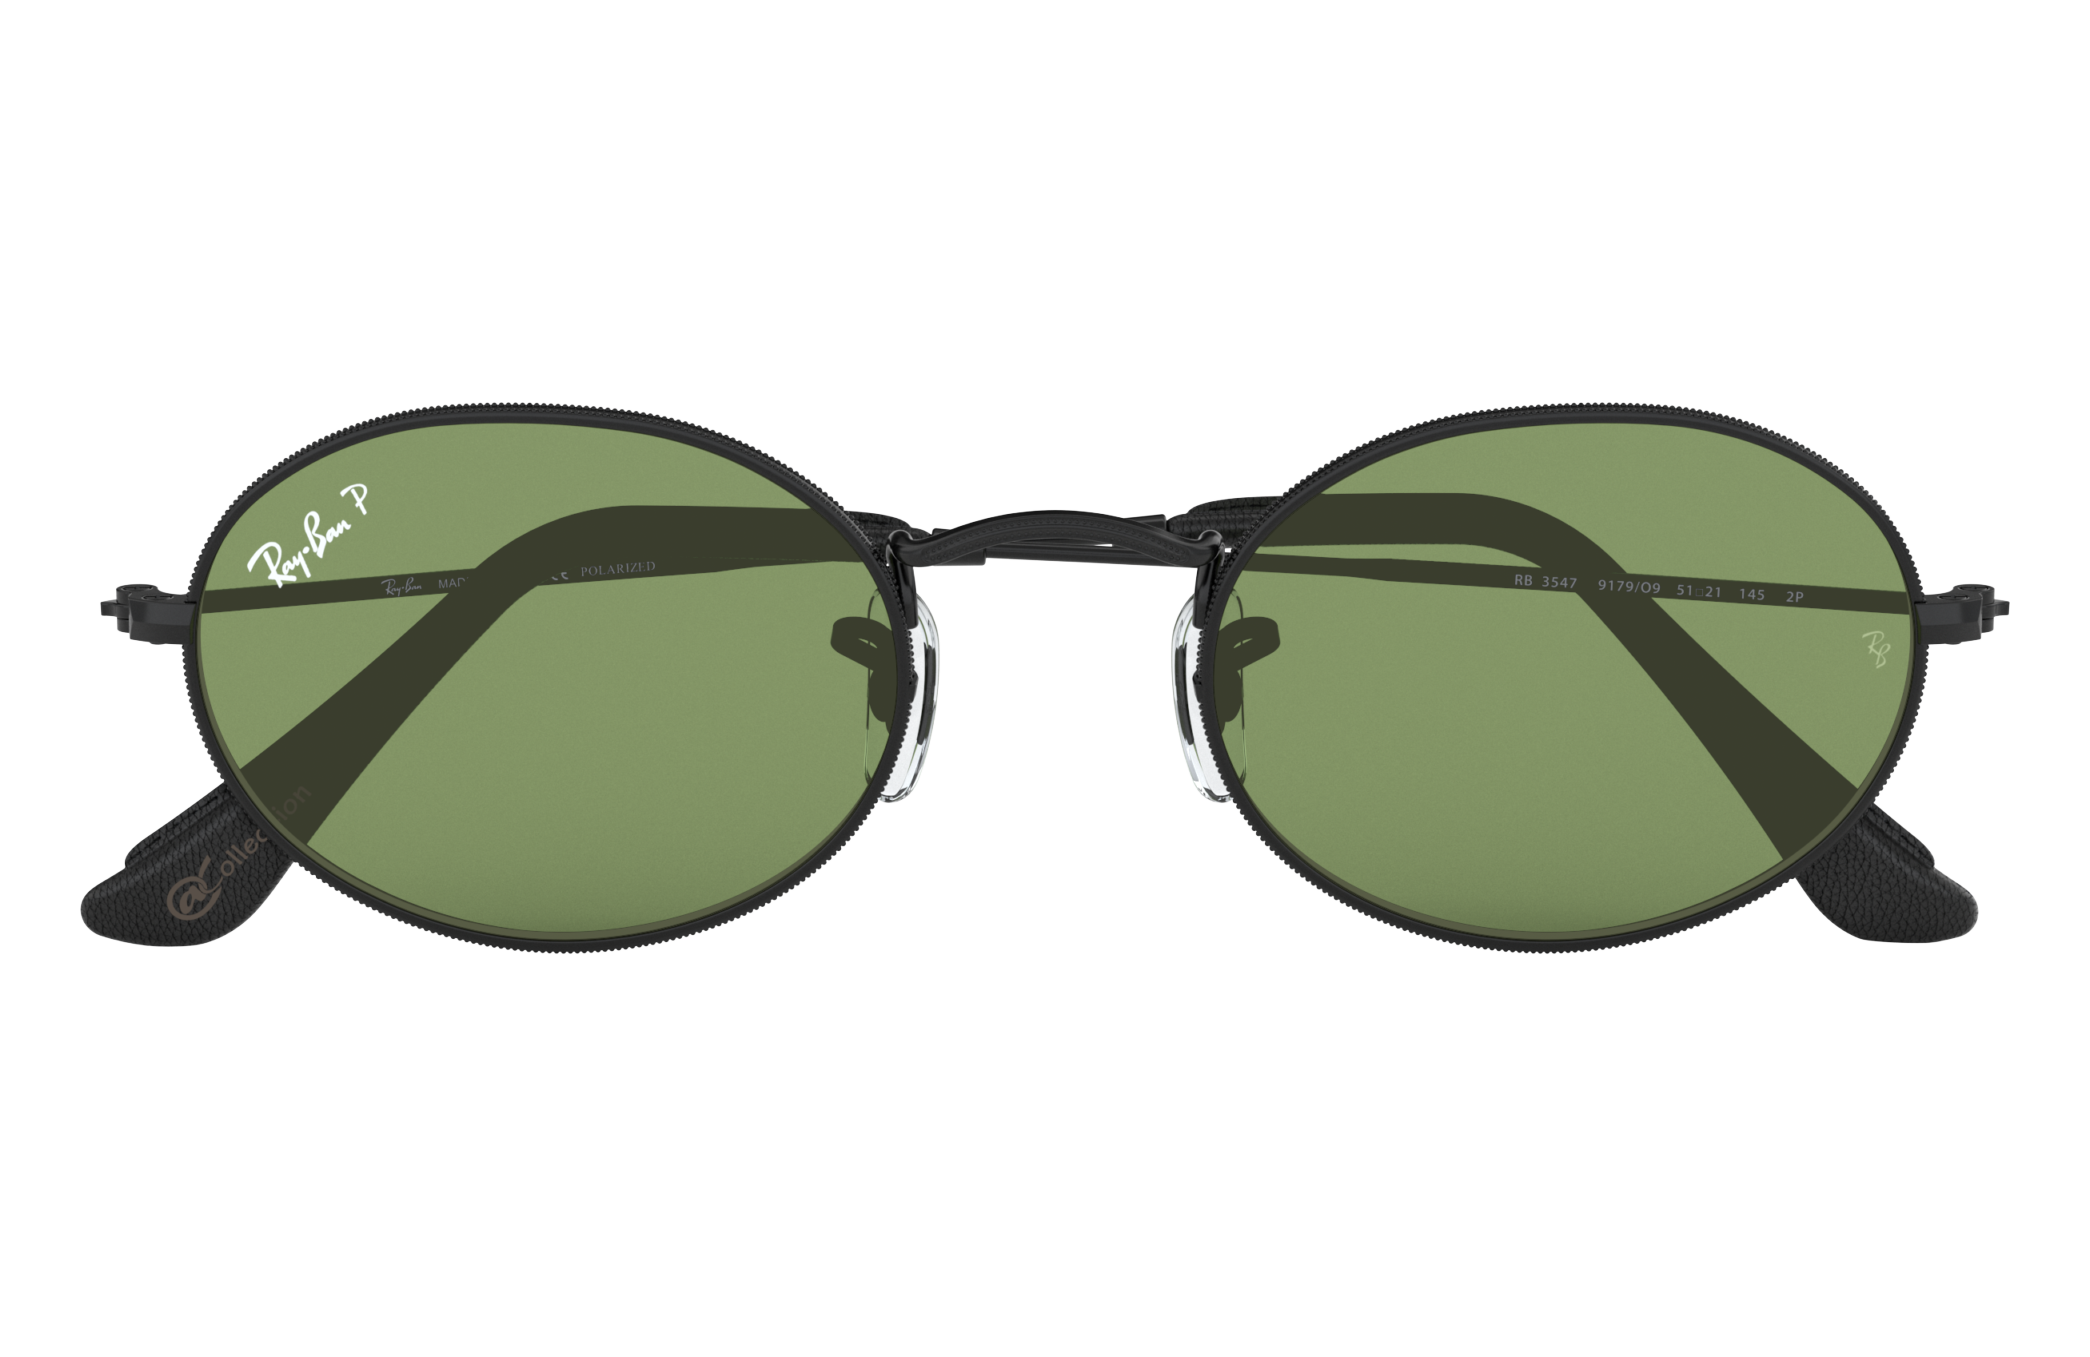 ray ban oval green